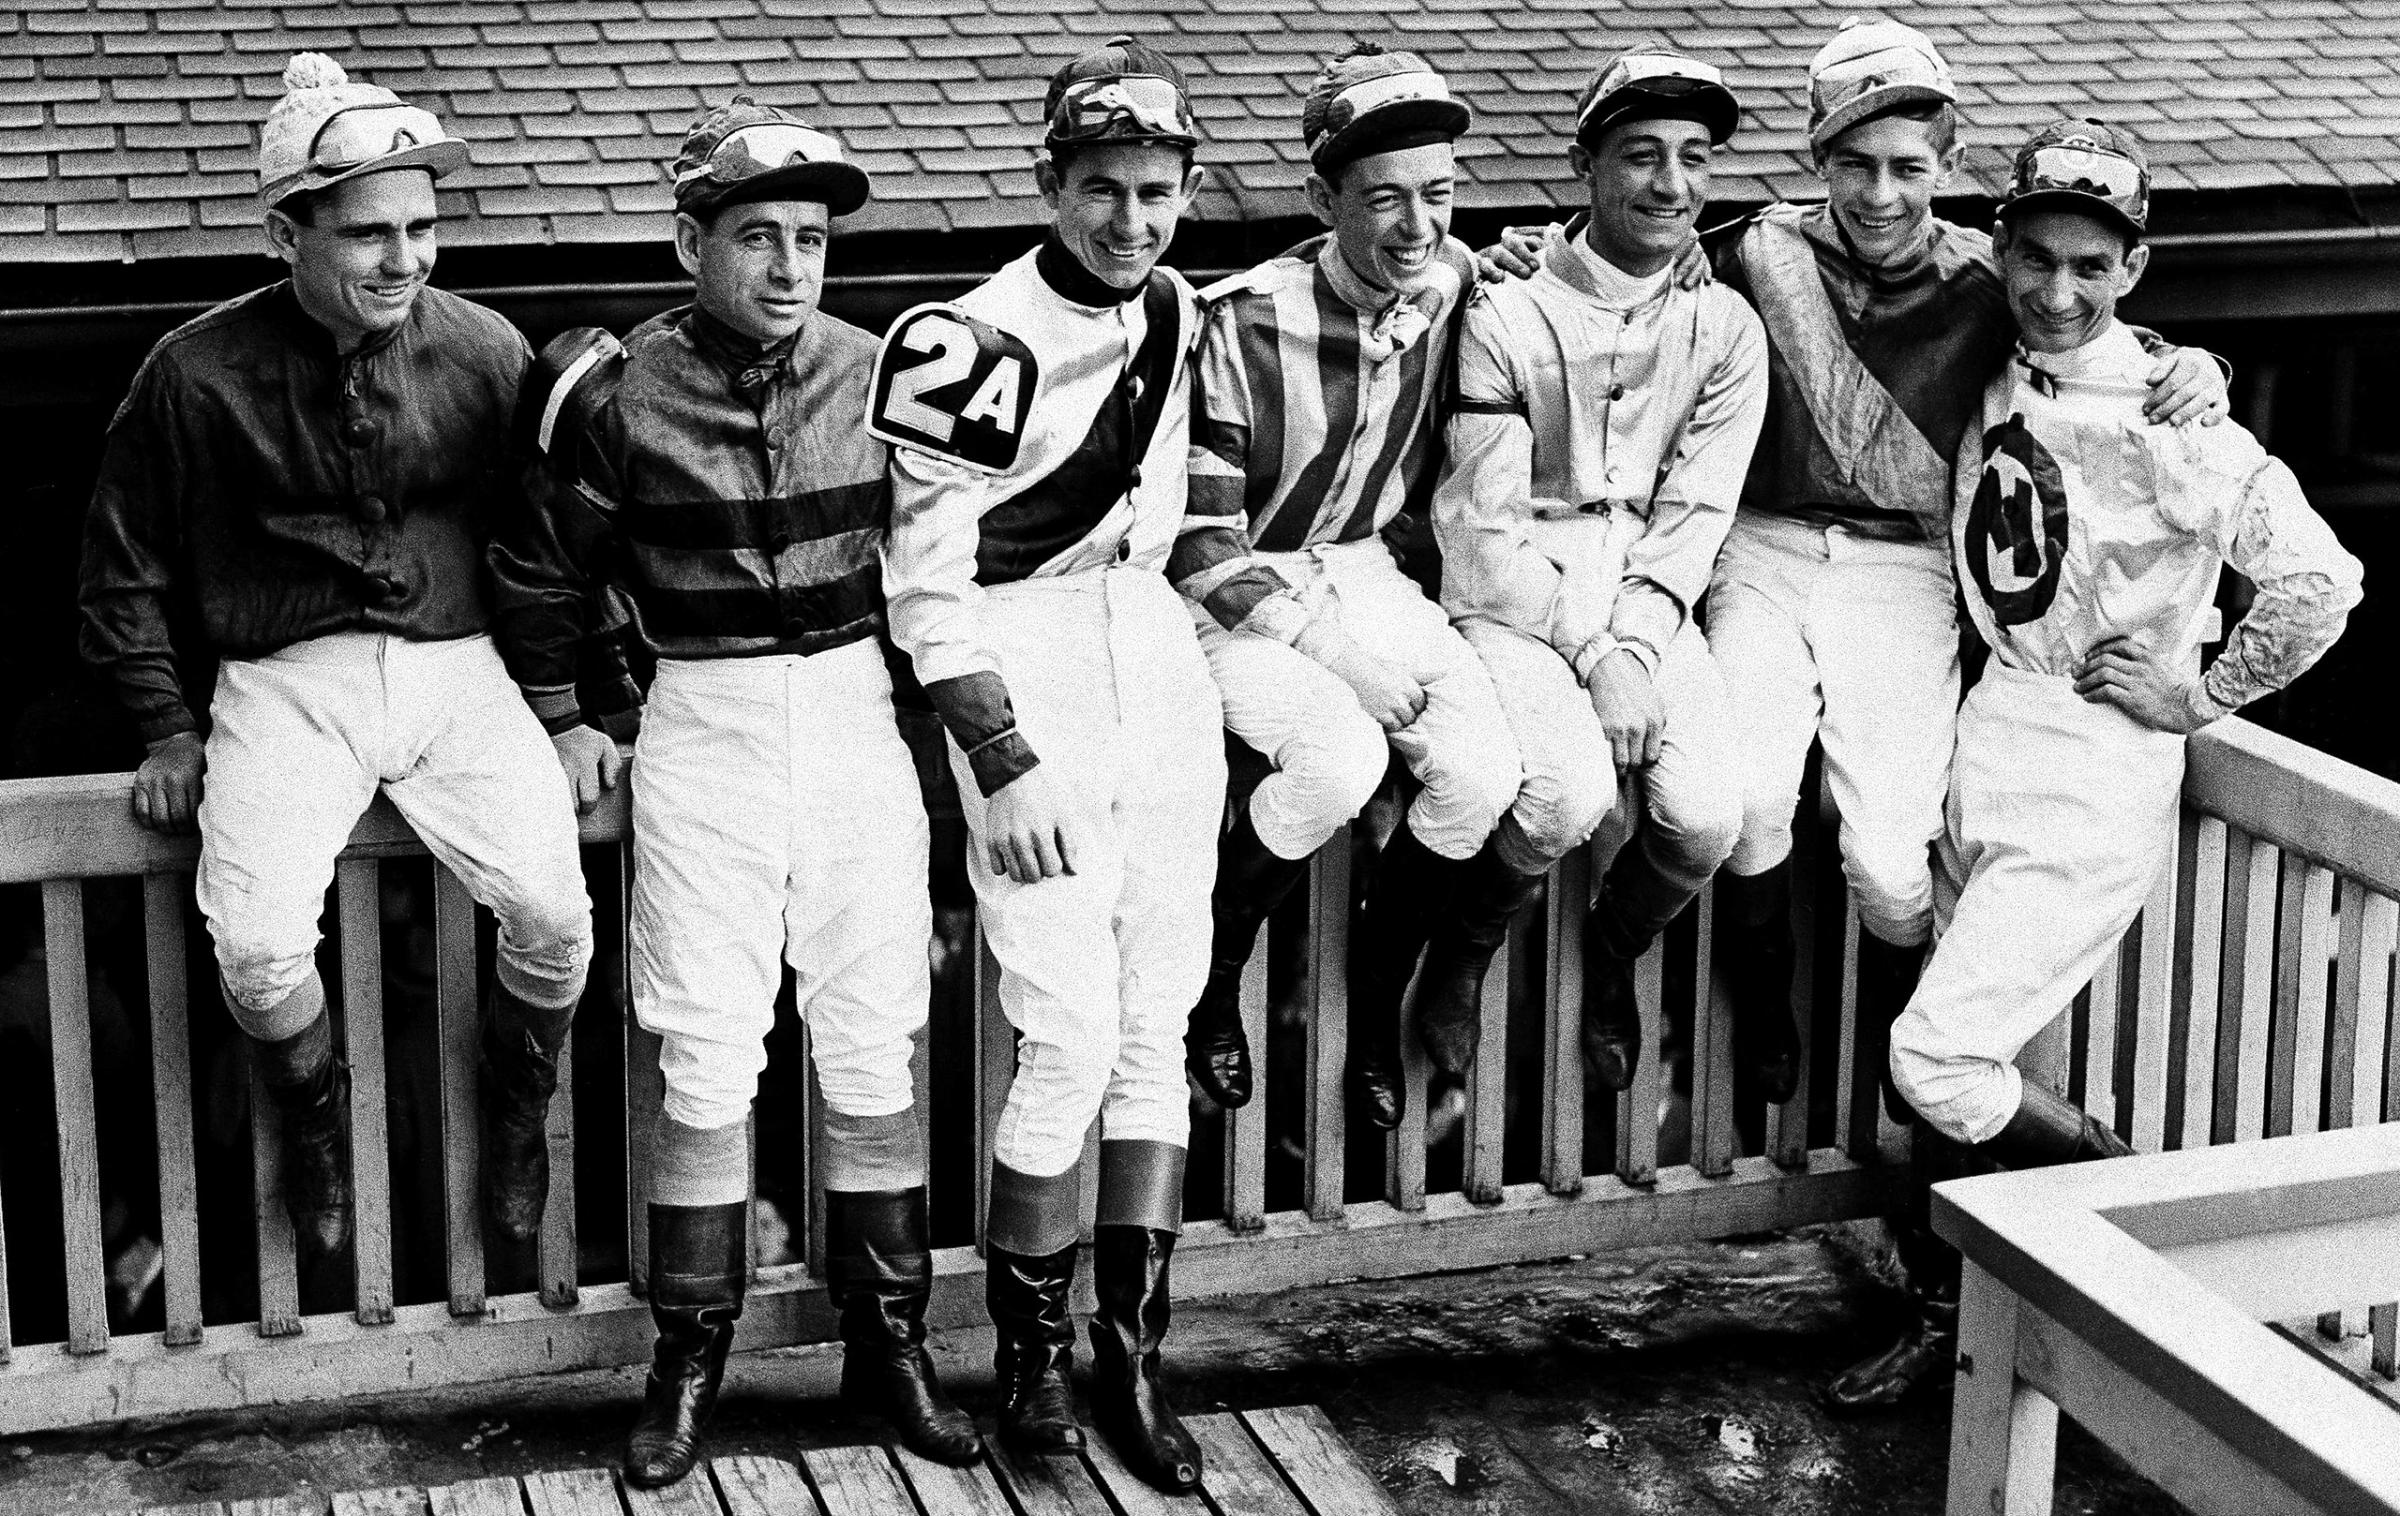 Seven of the Jockeys scheduled to ride in the 1947 Kentucky Derby sit on the rail at Churchill Downs after taking part in the Kentucky Oaks. L. To R., with horses they'll ride: Steve Brooks, Star Reward; Johny Longden, on trust; Eric Guerin, Jet Pilot; Shelby Clark, Cosmic Bomb; Eddie Arcaro, Phalanx; Job Jessop, Liberty road, and Will Balzaretti, Riskolater.